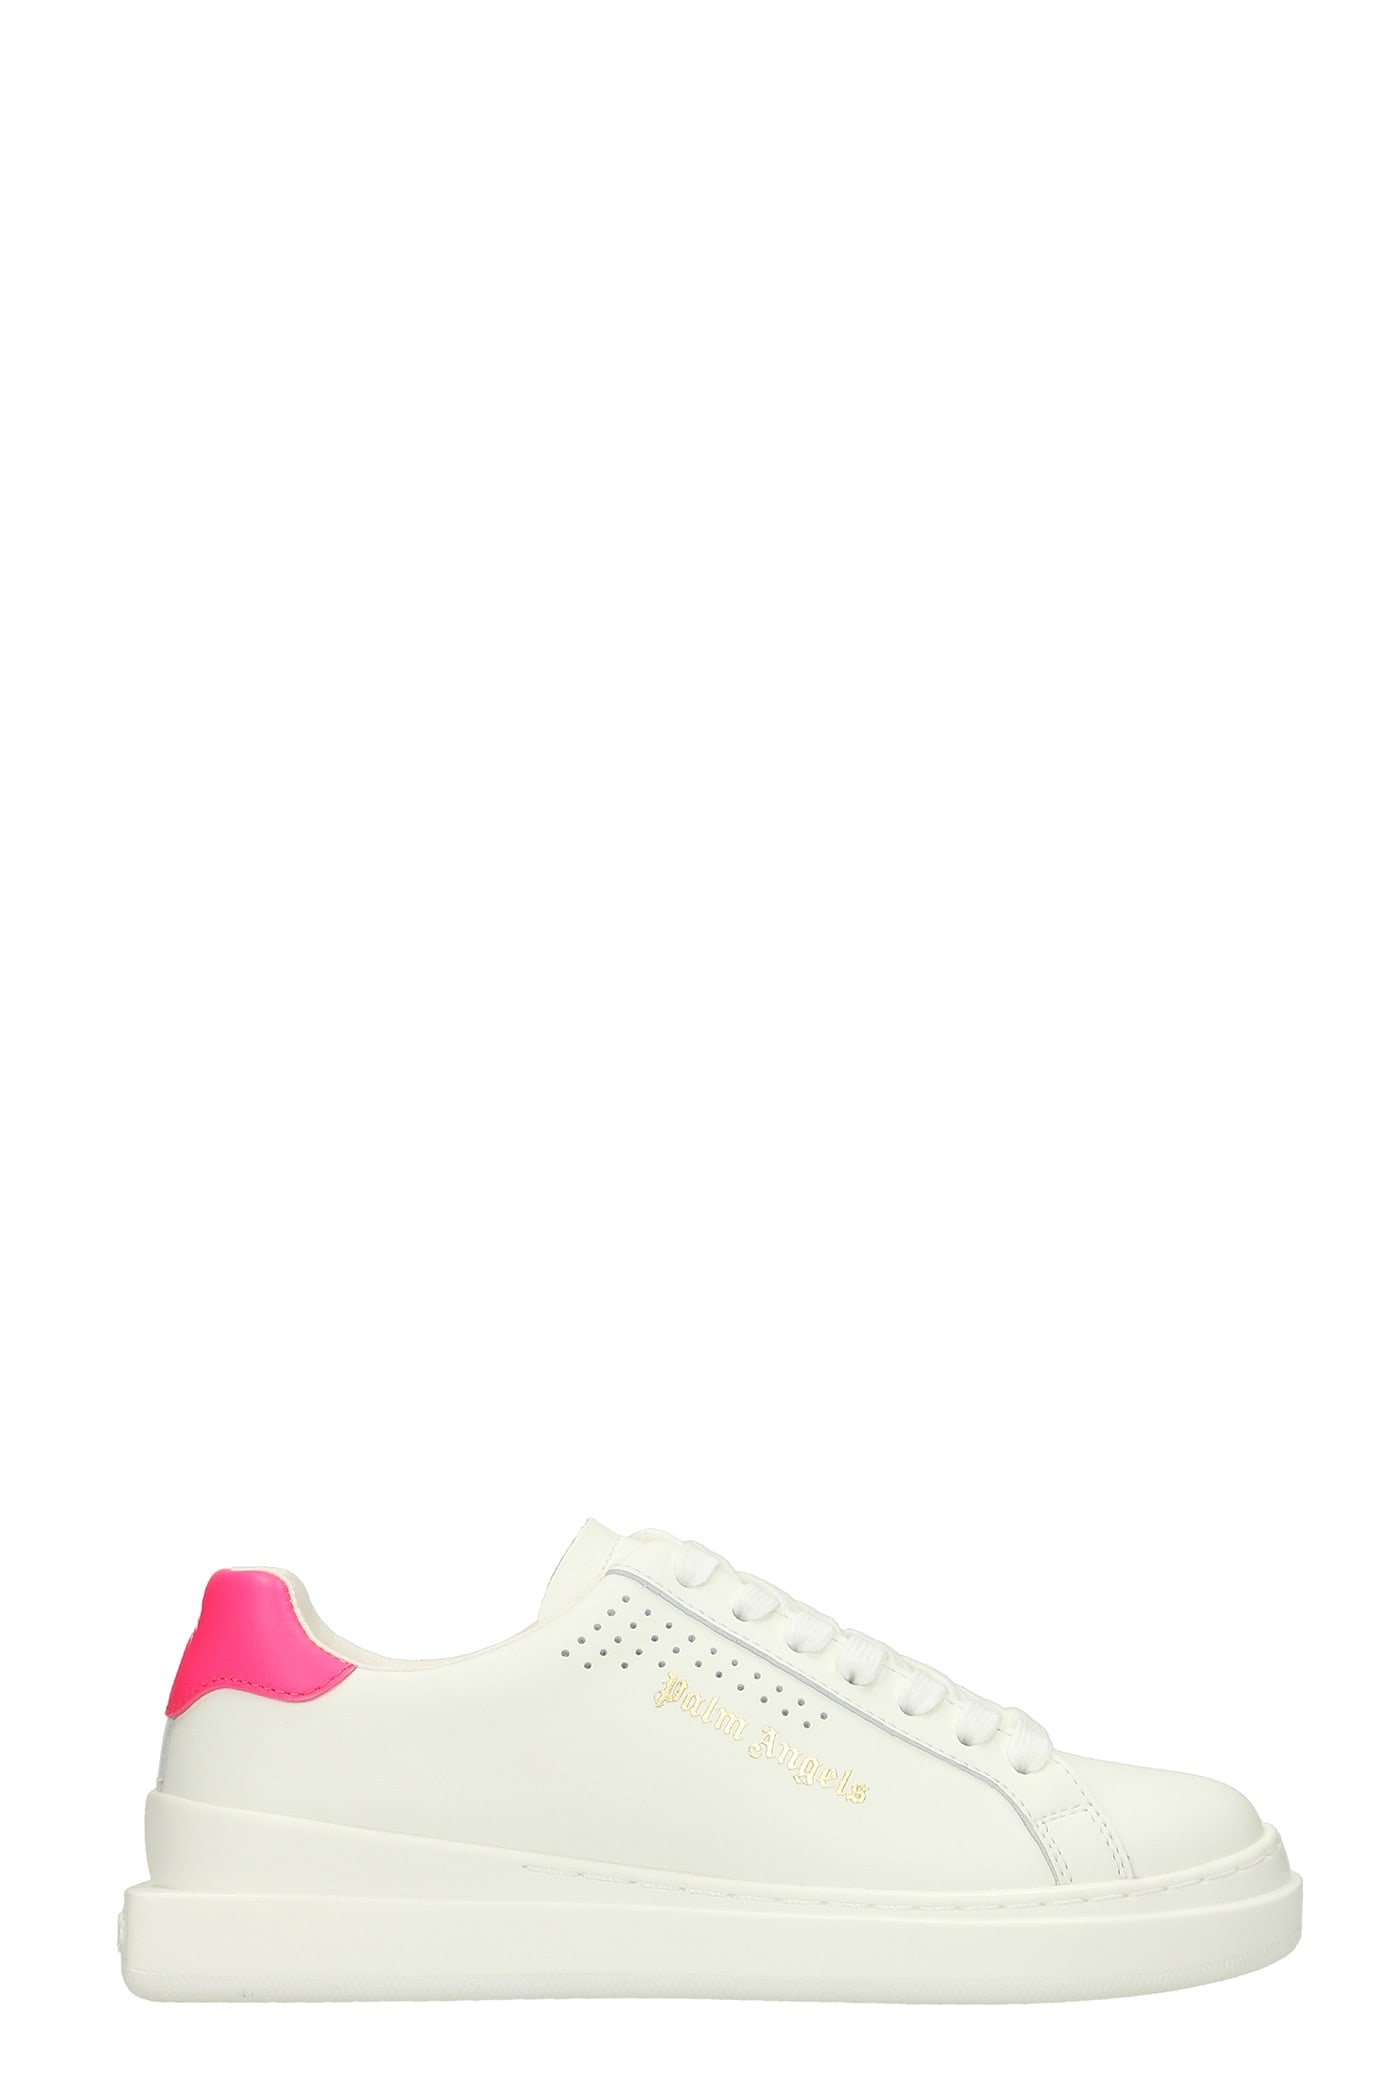 Palm Angels Sneakers In White Leather